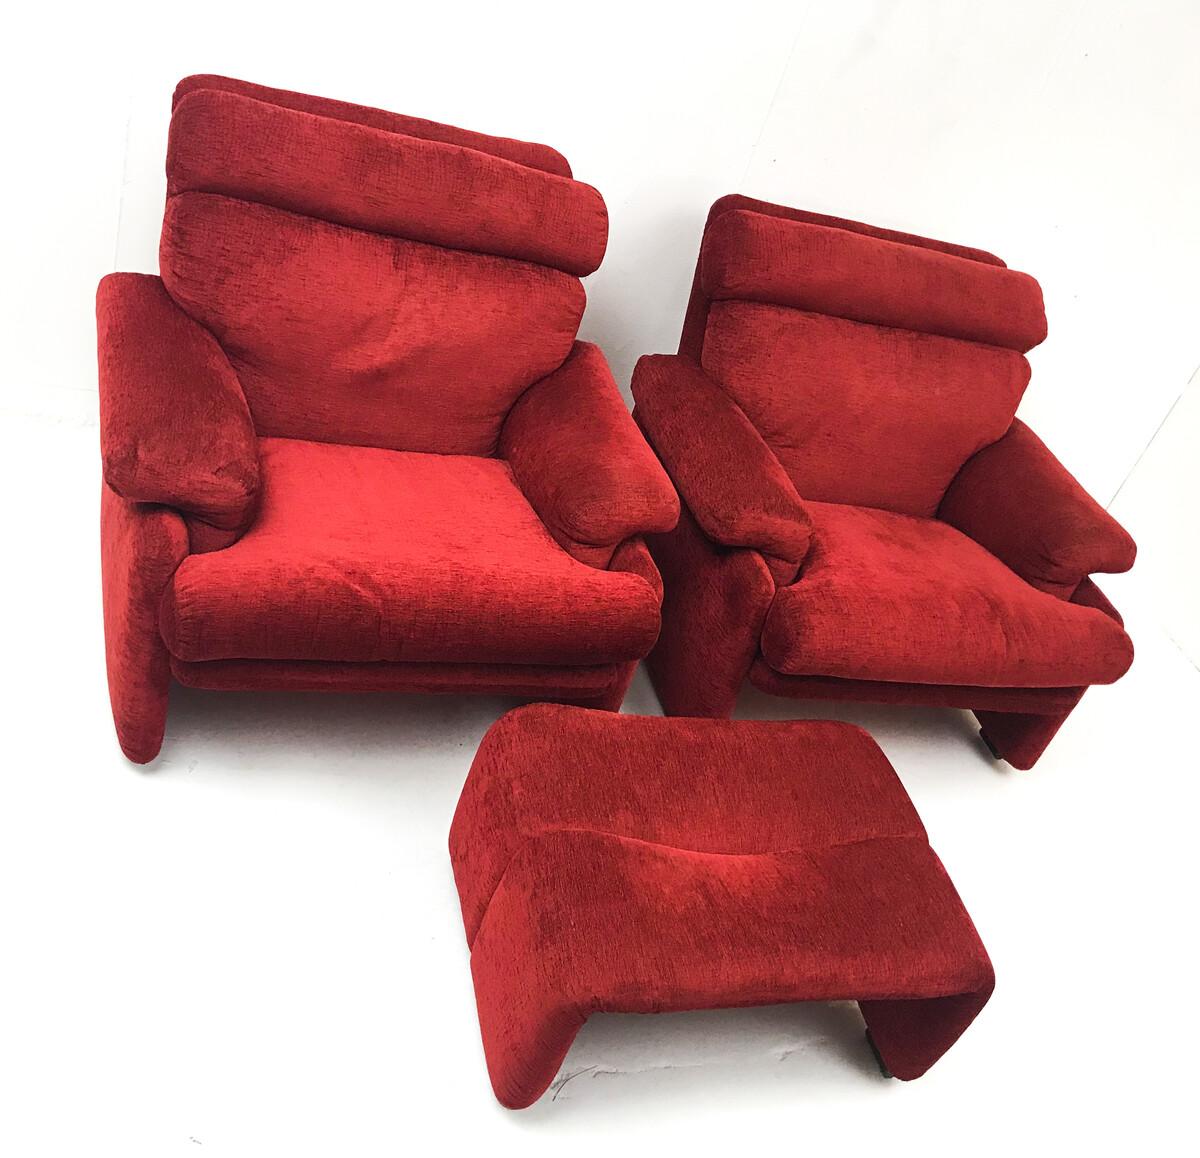 Set of two armchairs and an ottoman in a warm red colour. Designed in Italy in 1966 by Tobia Scarpa for the editor B&B. 
Measures for the Ottoman: 68x51x34cm